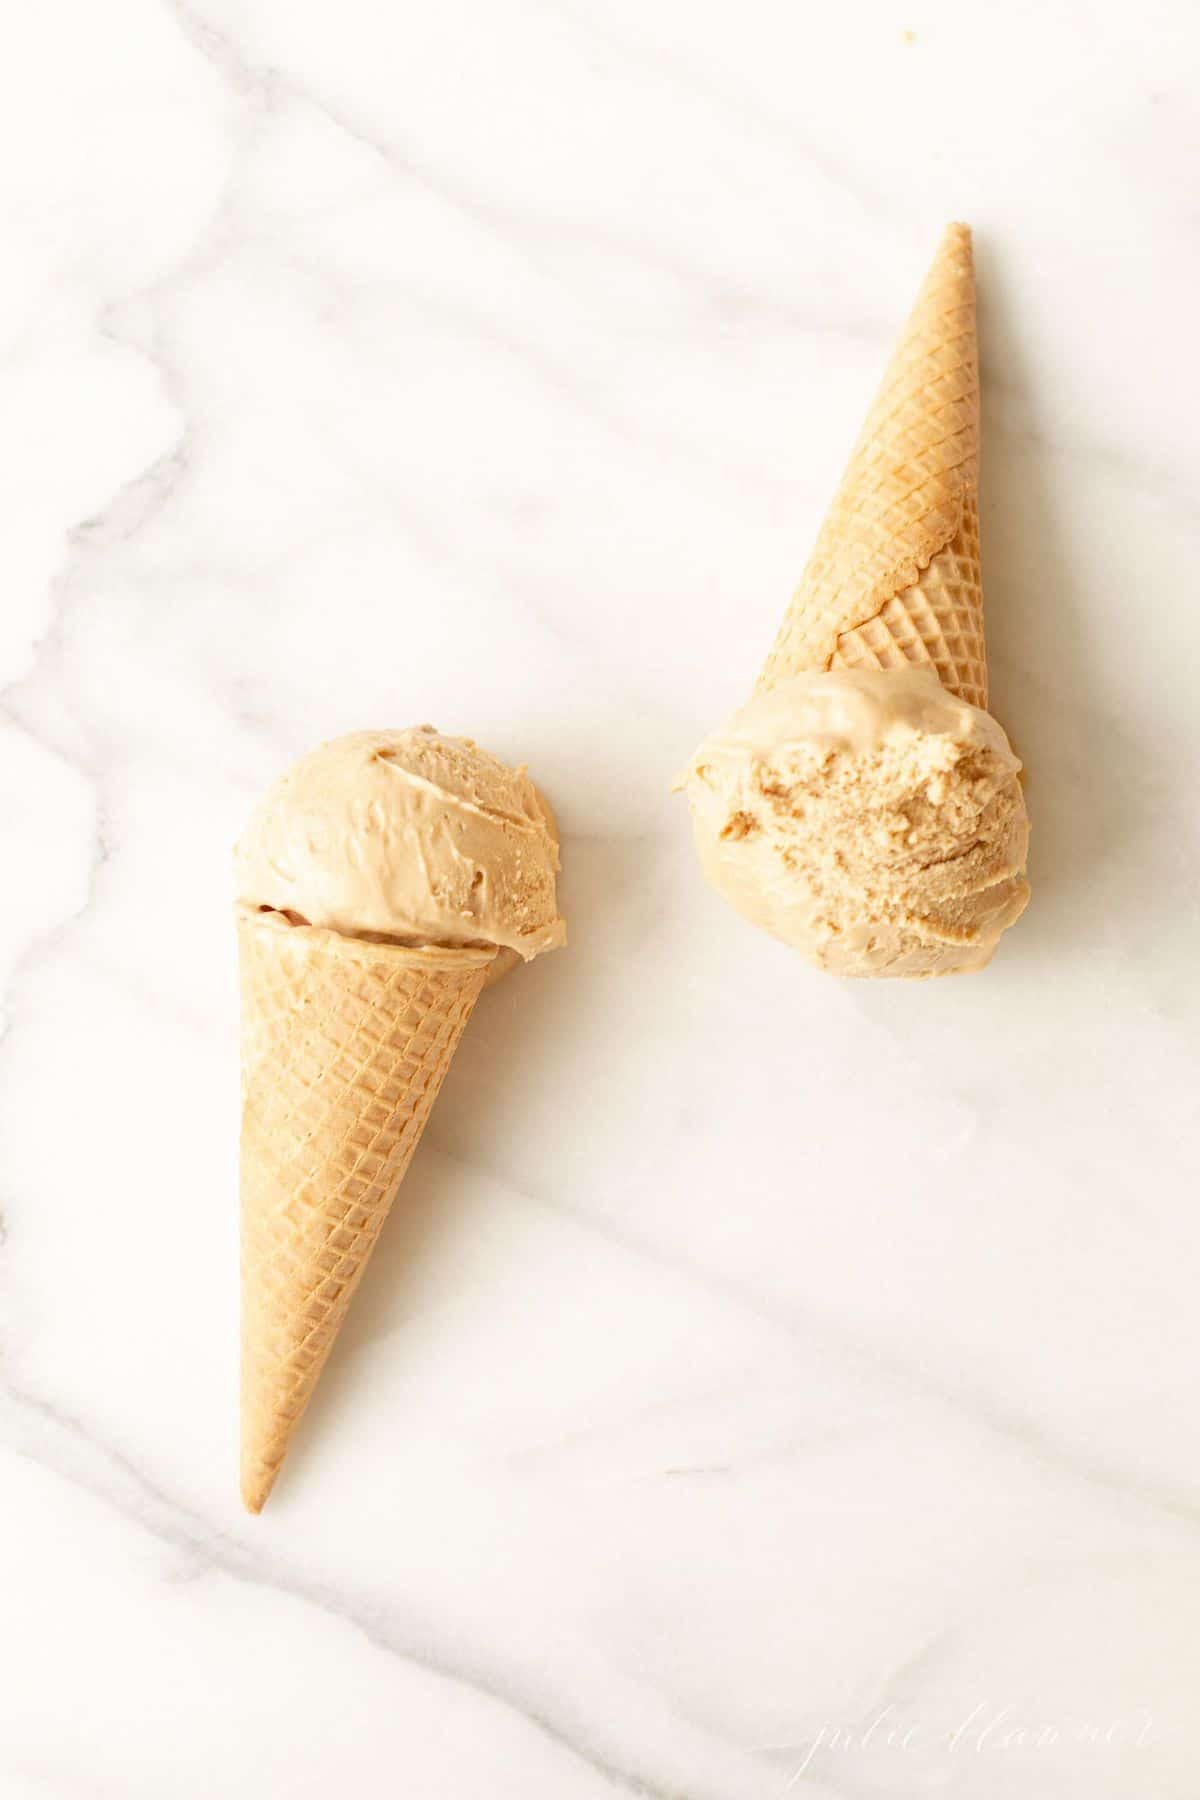 Two waffle ice cream cones on a marble surface, filled with homemade speculoos ice cream. #cookiebuttericecream